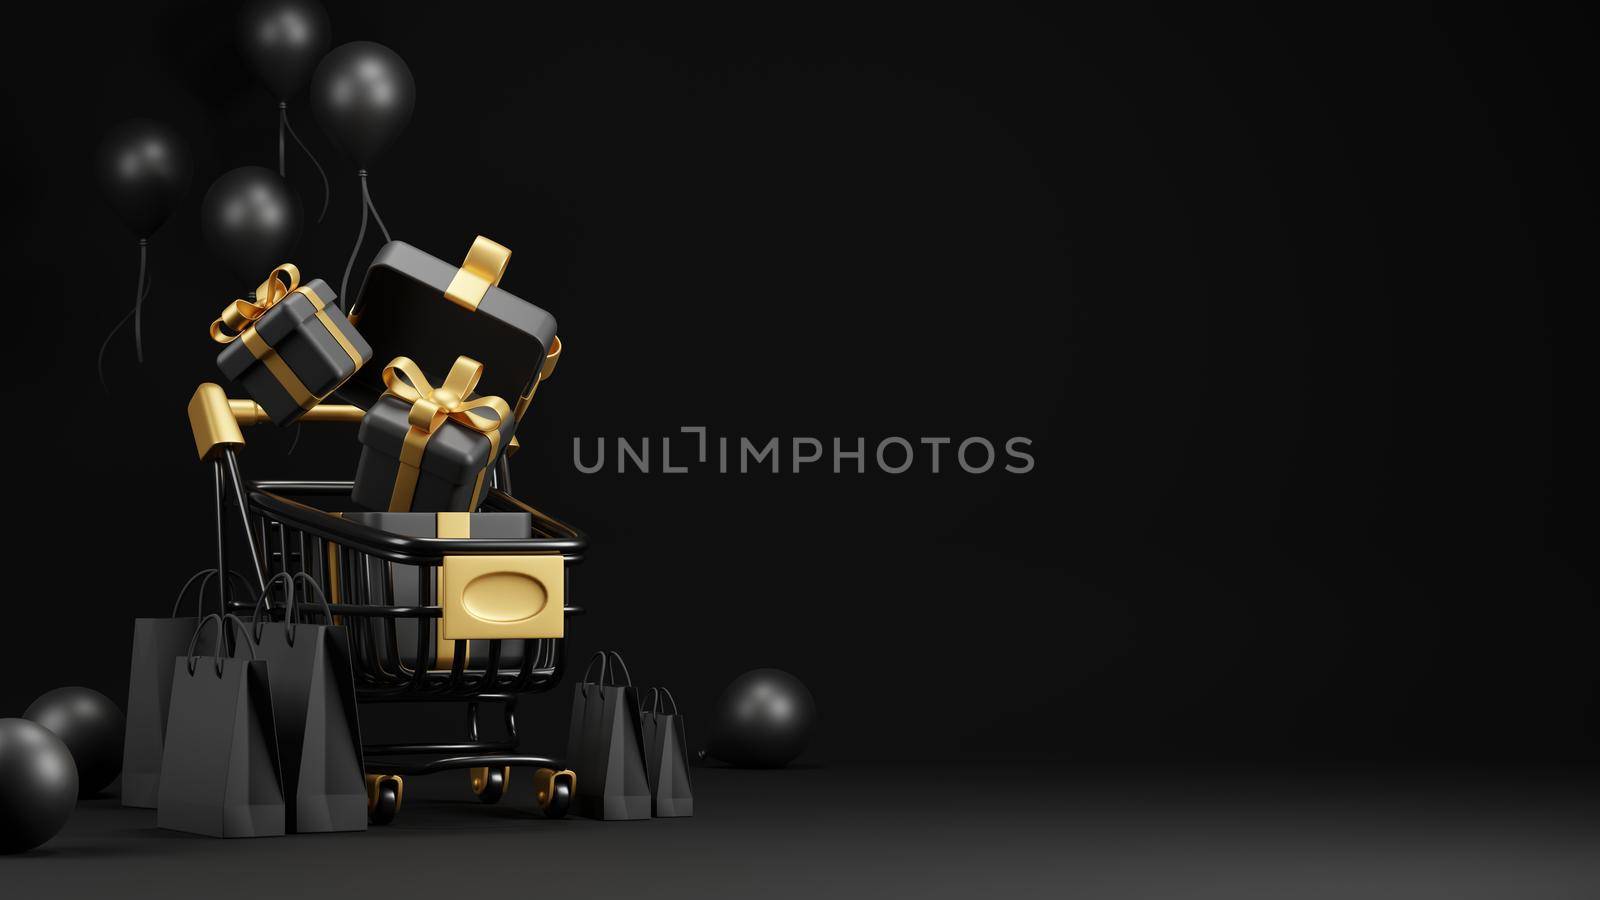 Black friday sale banner design of shopping cart and gift box with paper bag on black background 3D render by Myimagine